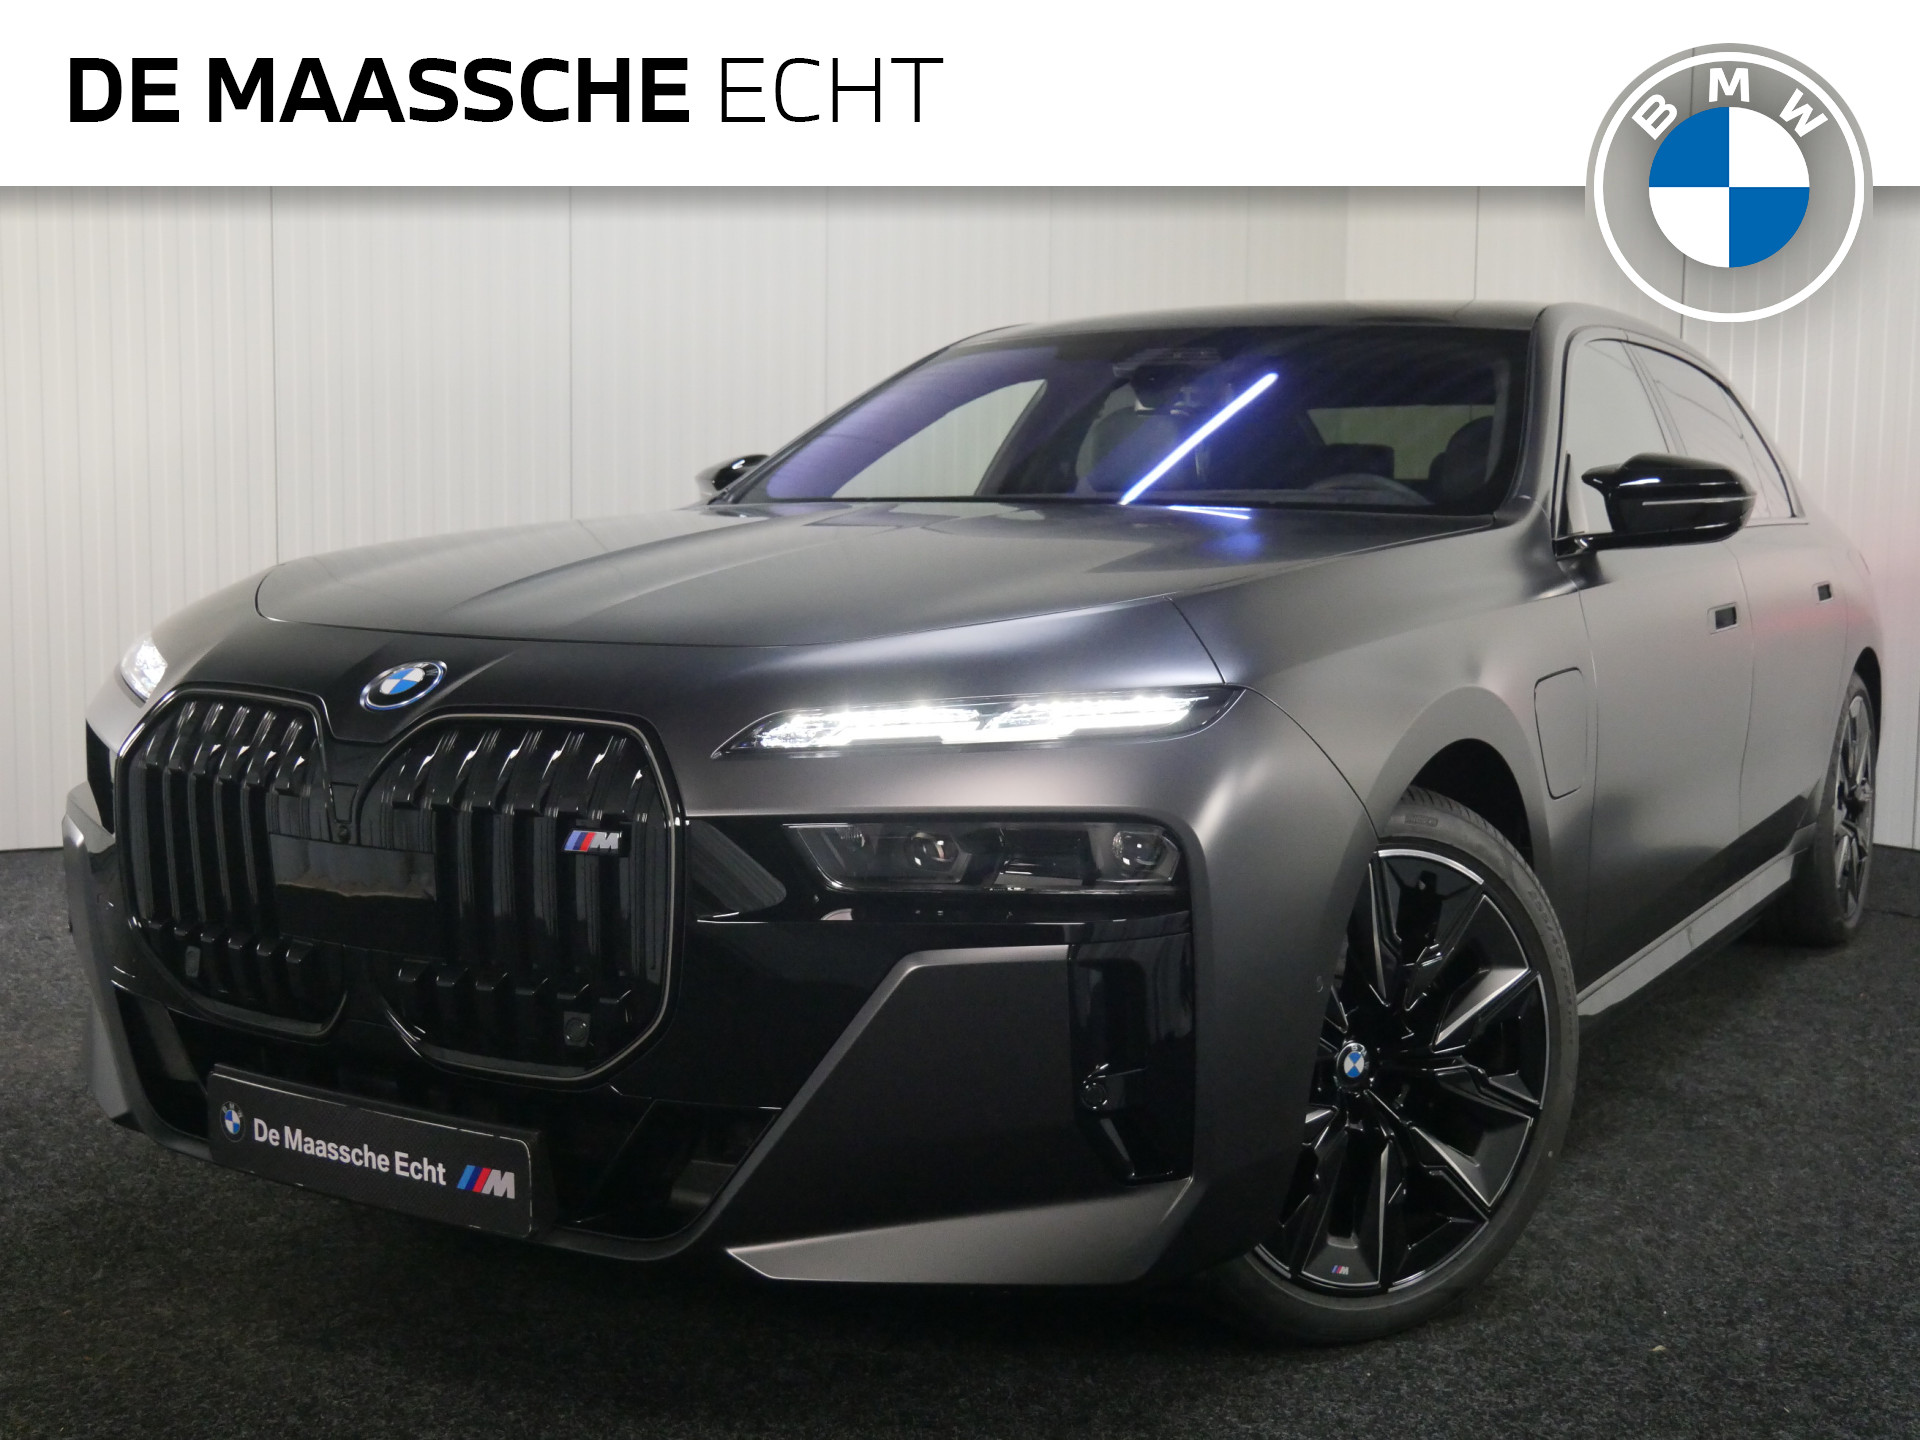 BMW 7 Serie M760e xDrive High Executive Automaat / Panoramadak Sky Lounge / Massagefunctie voor + achter / Bowers & Wilkins / Parking Assistant Professional / Active Steering